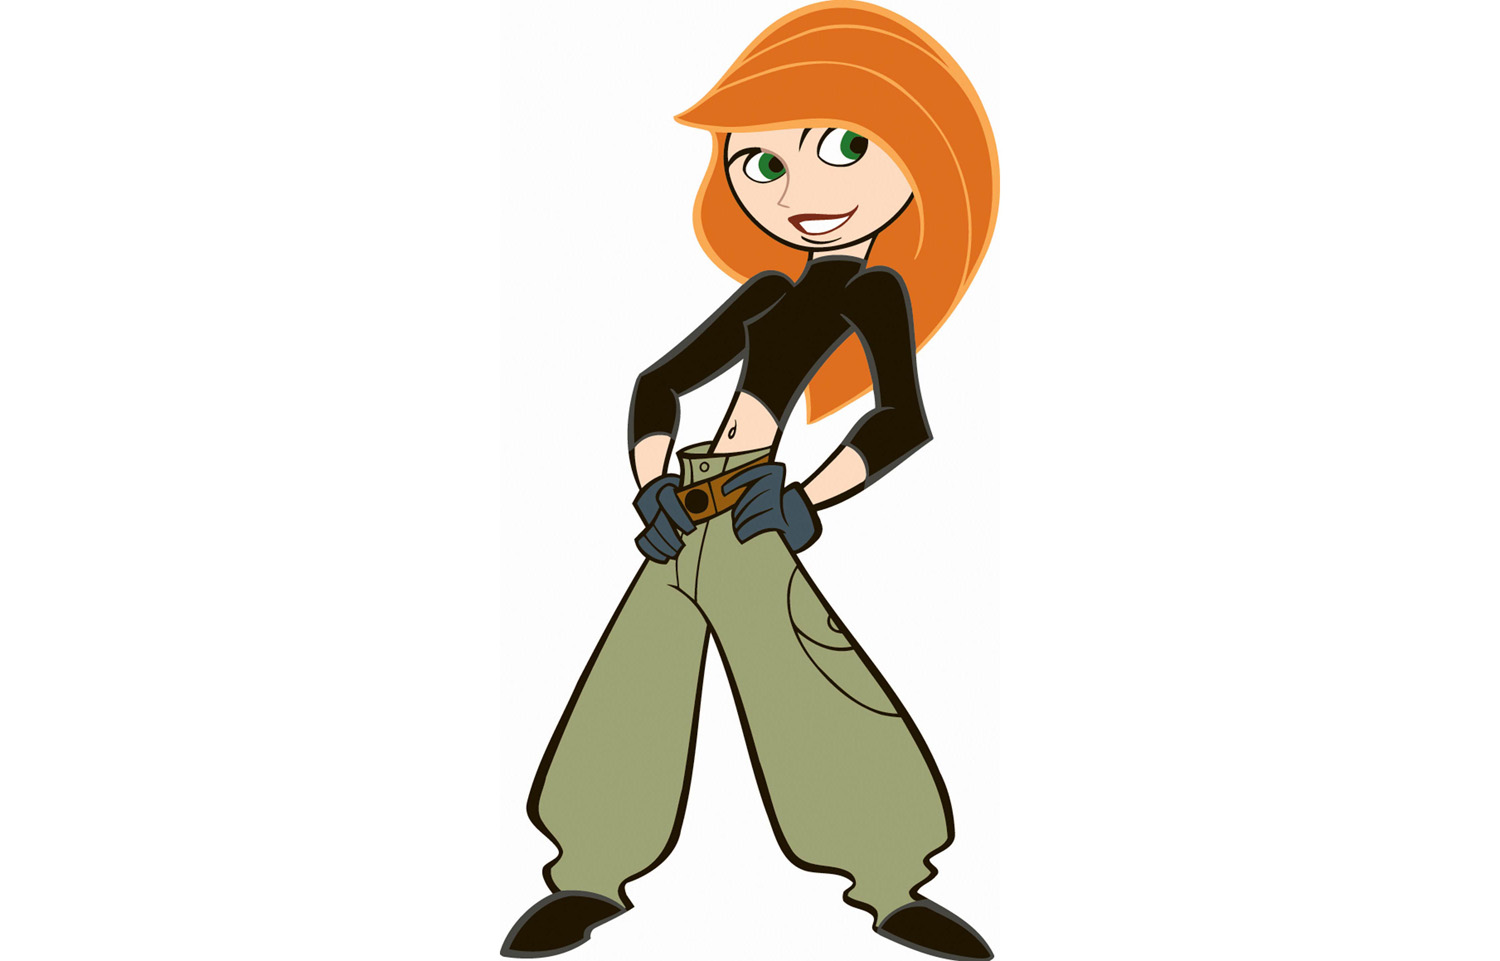 Kimpossible. 